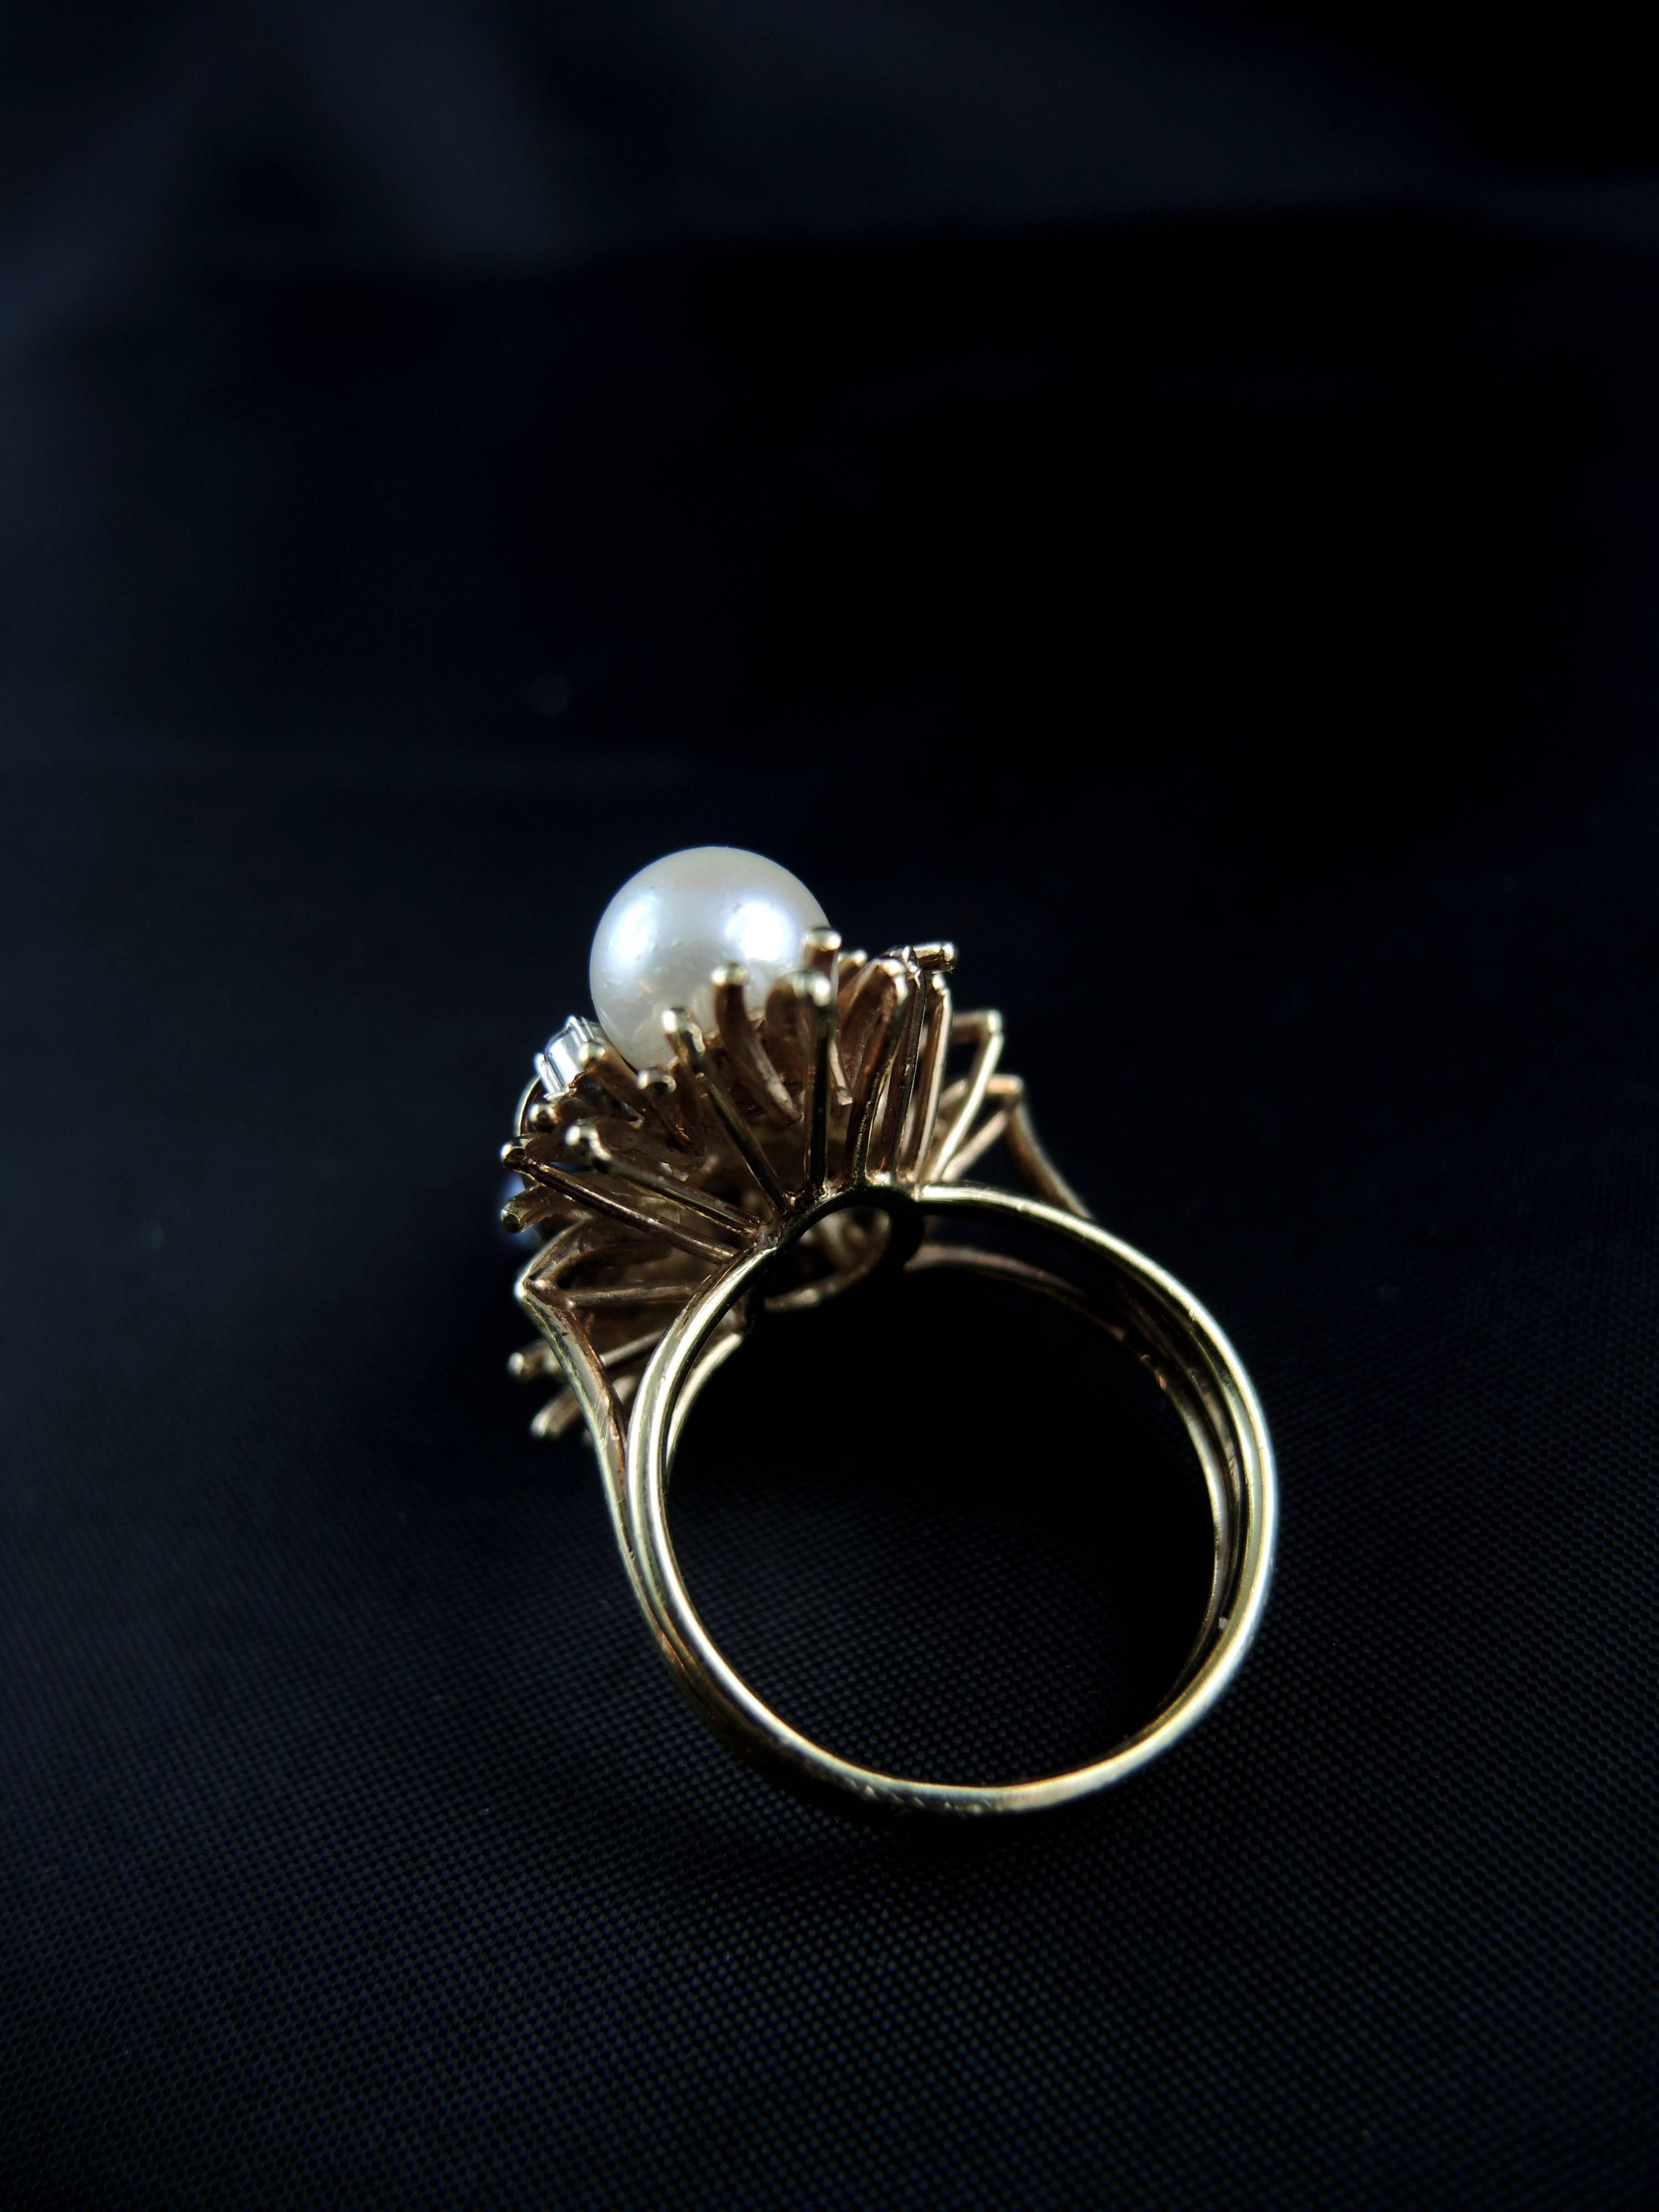 Women's Cocktail Ring Set with Diamonds, Coral and Pearls, circa 1970